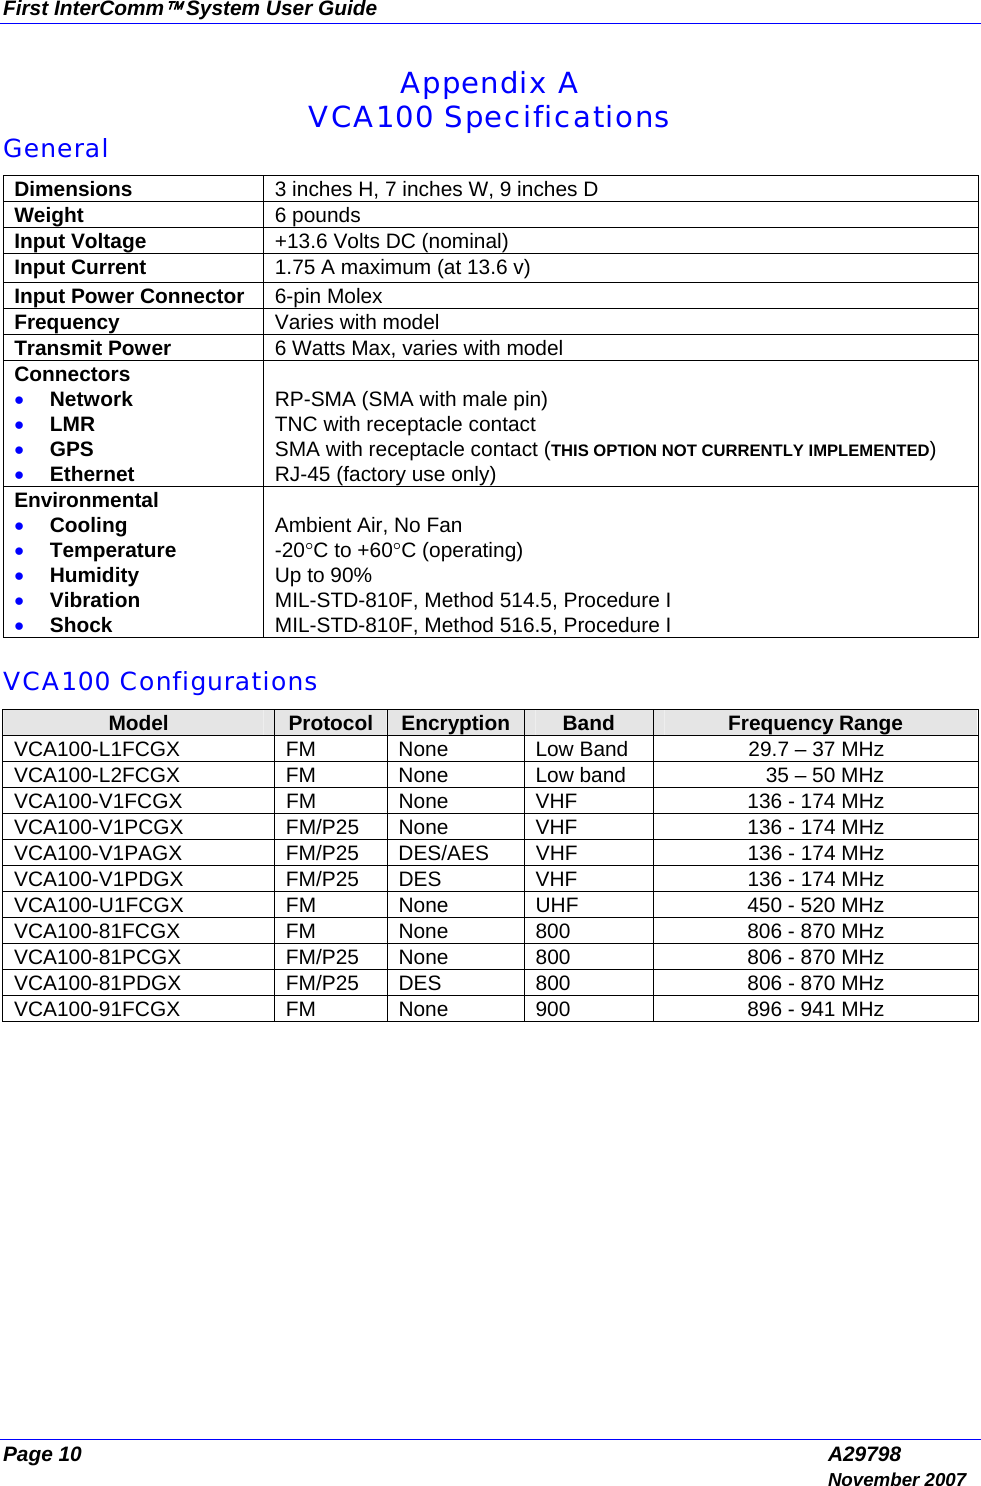 First InterComm™ System User Guide Page 10  A29798  November 2007 Appendix A VCA100 Specifications General Dimensions  3 inches H, 7 inches W, 9 inches D Weight  6 pounds  Input Voltage  +13.6 Volts DC (nominal) Input Current  1.75 A maximum (at 13.6 v) Input Power Connector  6-pin Molex Frequency  Varies with model Transmit Power  6 Watts Max, varies with model Connectors • Network • LMR • GPS • Ethernet  RP-SMA (SMA with male pin) TNC with receptacle contact SMA with receptacle contact (THIS OPTION NOT CURRENTLY IMPLEMENTED) RJ-45 (factory use only) Environmental • Cooling • Temperature • Humidity • Vibration • Shock  Ambient Air, No Fan -20°C to +60°C (operating) Up to 90% MIL-STD-810F, Method 514.5, Procedure I MIL-STD-810F, Method 516.5, Procedure I  VCA100 Configurations Model  Protocol  Encryption  Band  Frequency Range VCA100-L1FCGX  FM  None  Low Band  29.7 – 37 MHz VCA100-L2FCGX  FM  None  Low band  35 – 50 MHz VCA100-V1FCGX  FM  None  VHF  136 - 174 MHz VCA100-V1PCGX  FM/P25  None  VHF  136 - 174 MHz VCA100-V1PAGX  FM/P25  DES/AES  VHF  136 - 174 MHz VCA100-V1PDGX  FM/P25  DES  VHF  136 - 174 MHz VCA100-U1FCGX  FM  None  UHF  450 - 520 MHz VCA100-81FCGX  FM  None  800  806 - 870 MHz VCA100-81PCGX  FM/P25  None  800  806 - 870 MHz VCA100-81PDGX  FM/P25  DES  800  806 - 870 MHz VCA100-91FCGX  FM  None  900  896 - 941 MHz  